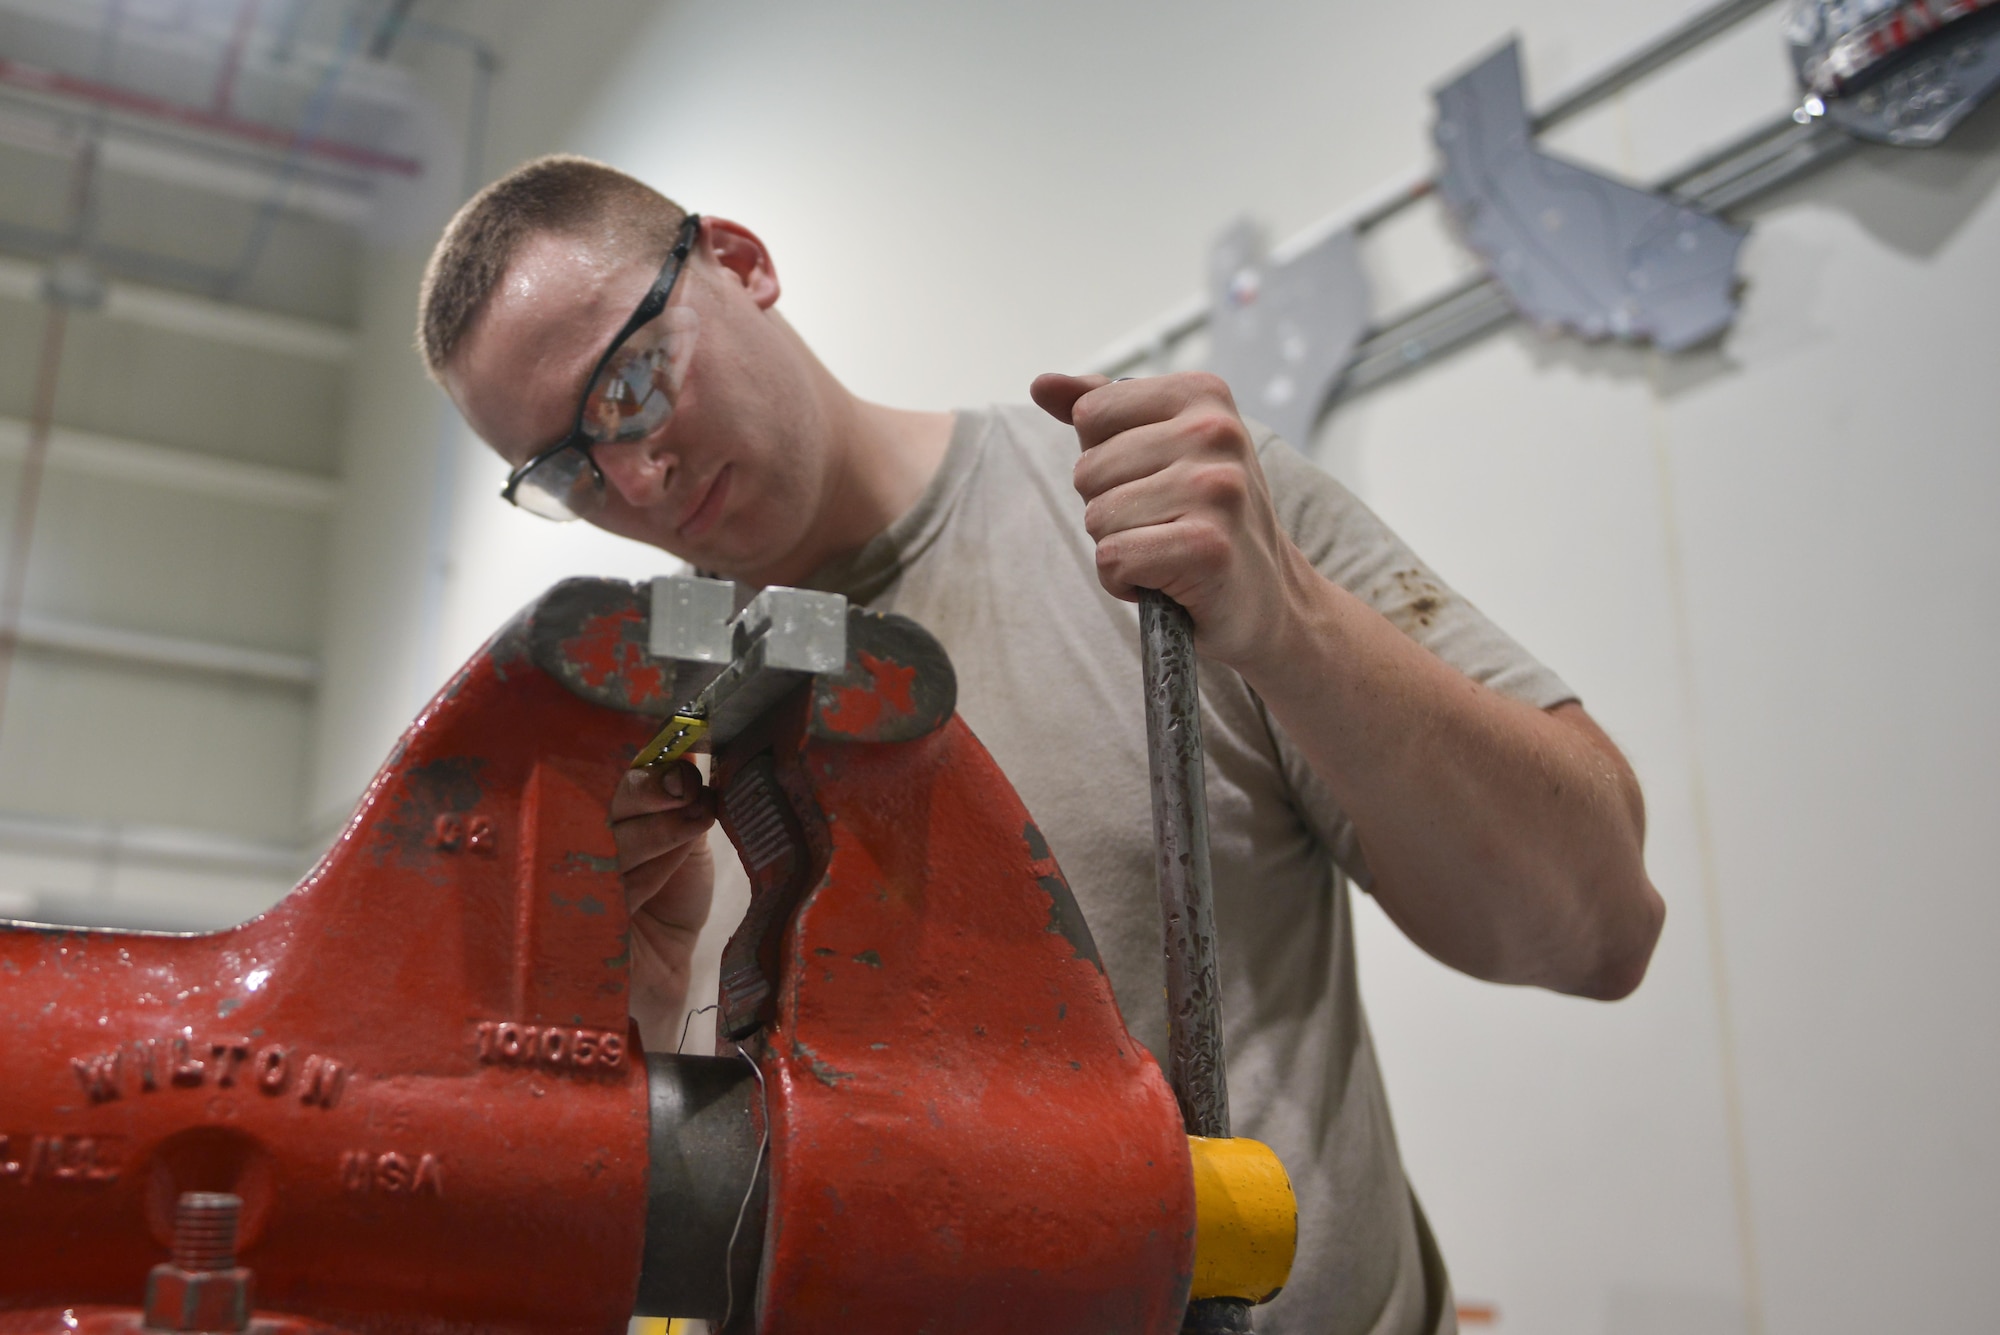 Senior Airman Adam Bentz, 379th Expeditionary Maintenance Squadron's fabrication flight, adjusts a KC-135 Stratotanker spoiler access panel part before returning to the flight line for application August 4, 2015 at Al Udeid Air Base, Qatar. The fabrications flight is partitioned into the aircraft structural maintenance and metal technology sections that make on-site repairs to aircraft deployed to Al Udeid. Most fabrications can be conducted on the flight line. For others, Airmen would bring in the part or create what is needed to keep the aircraft flying within hours. (U.S. Air Force photo/ Staff Sgt. Alexandre Montes)